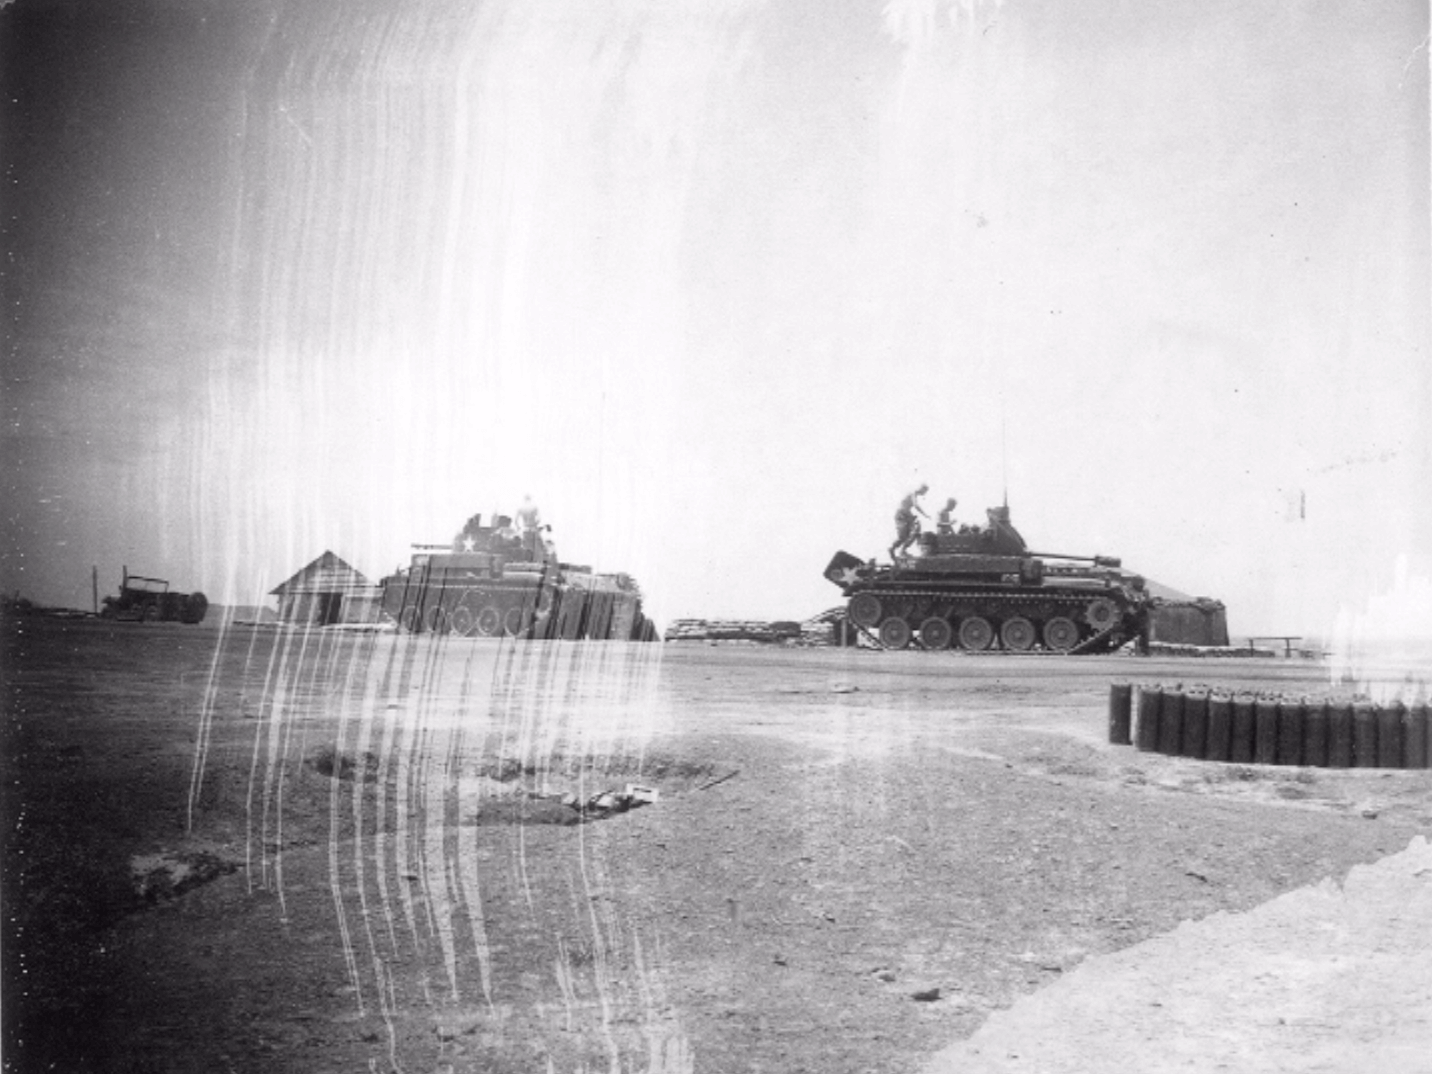 Two tanks moving across a desolate landscape.